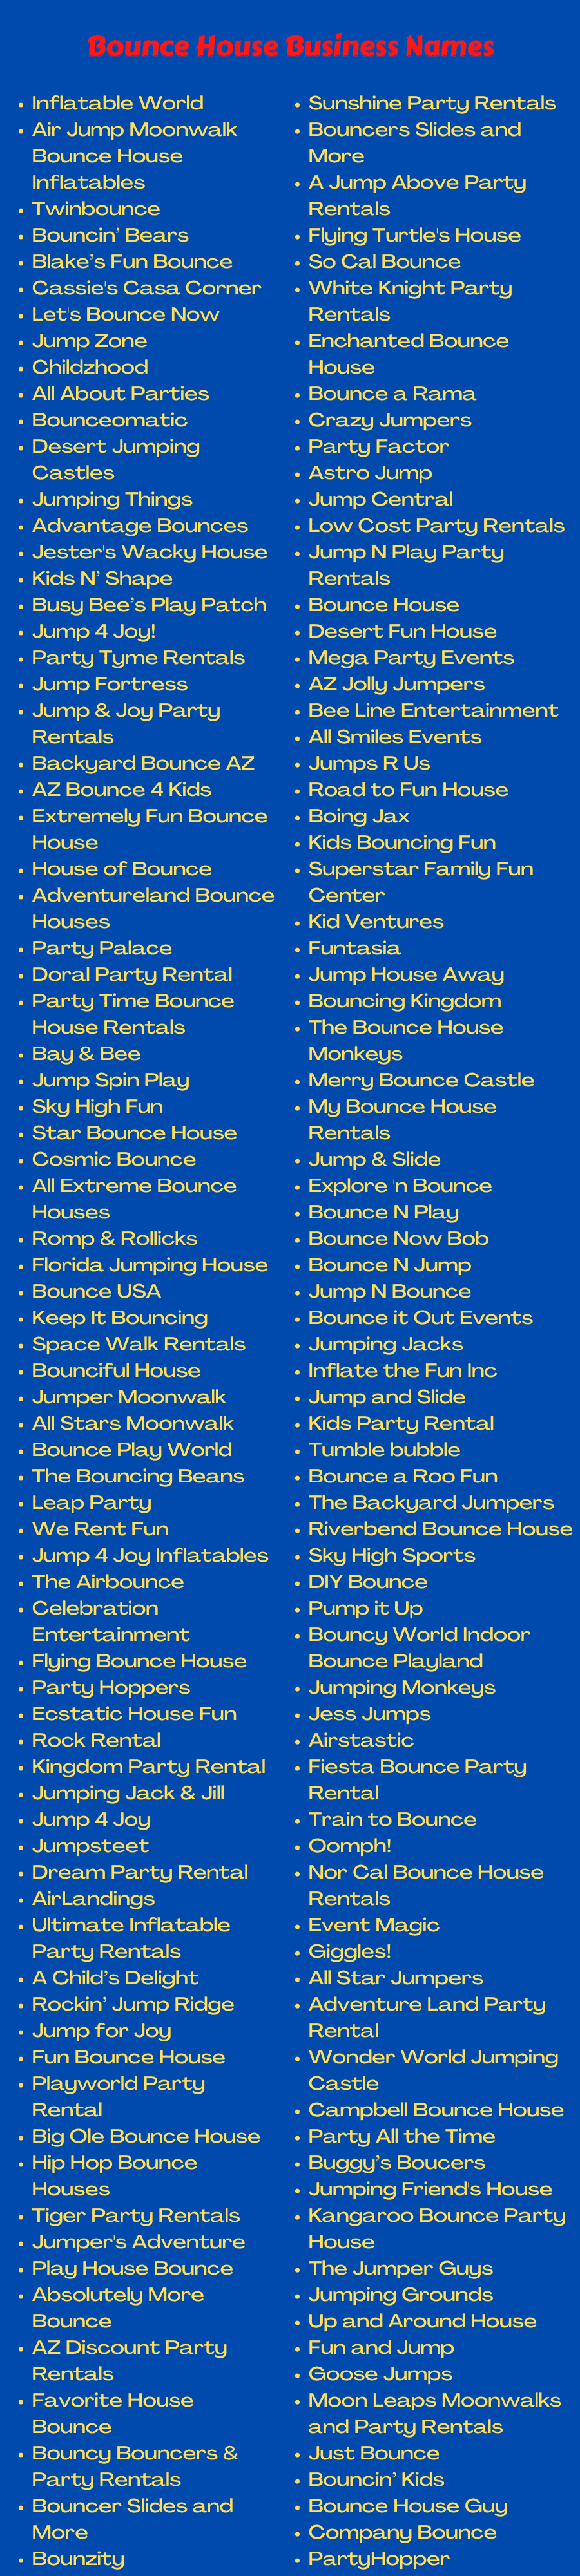 Bounce House Business Names